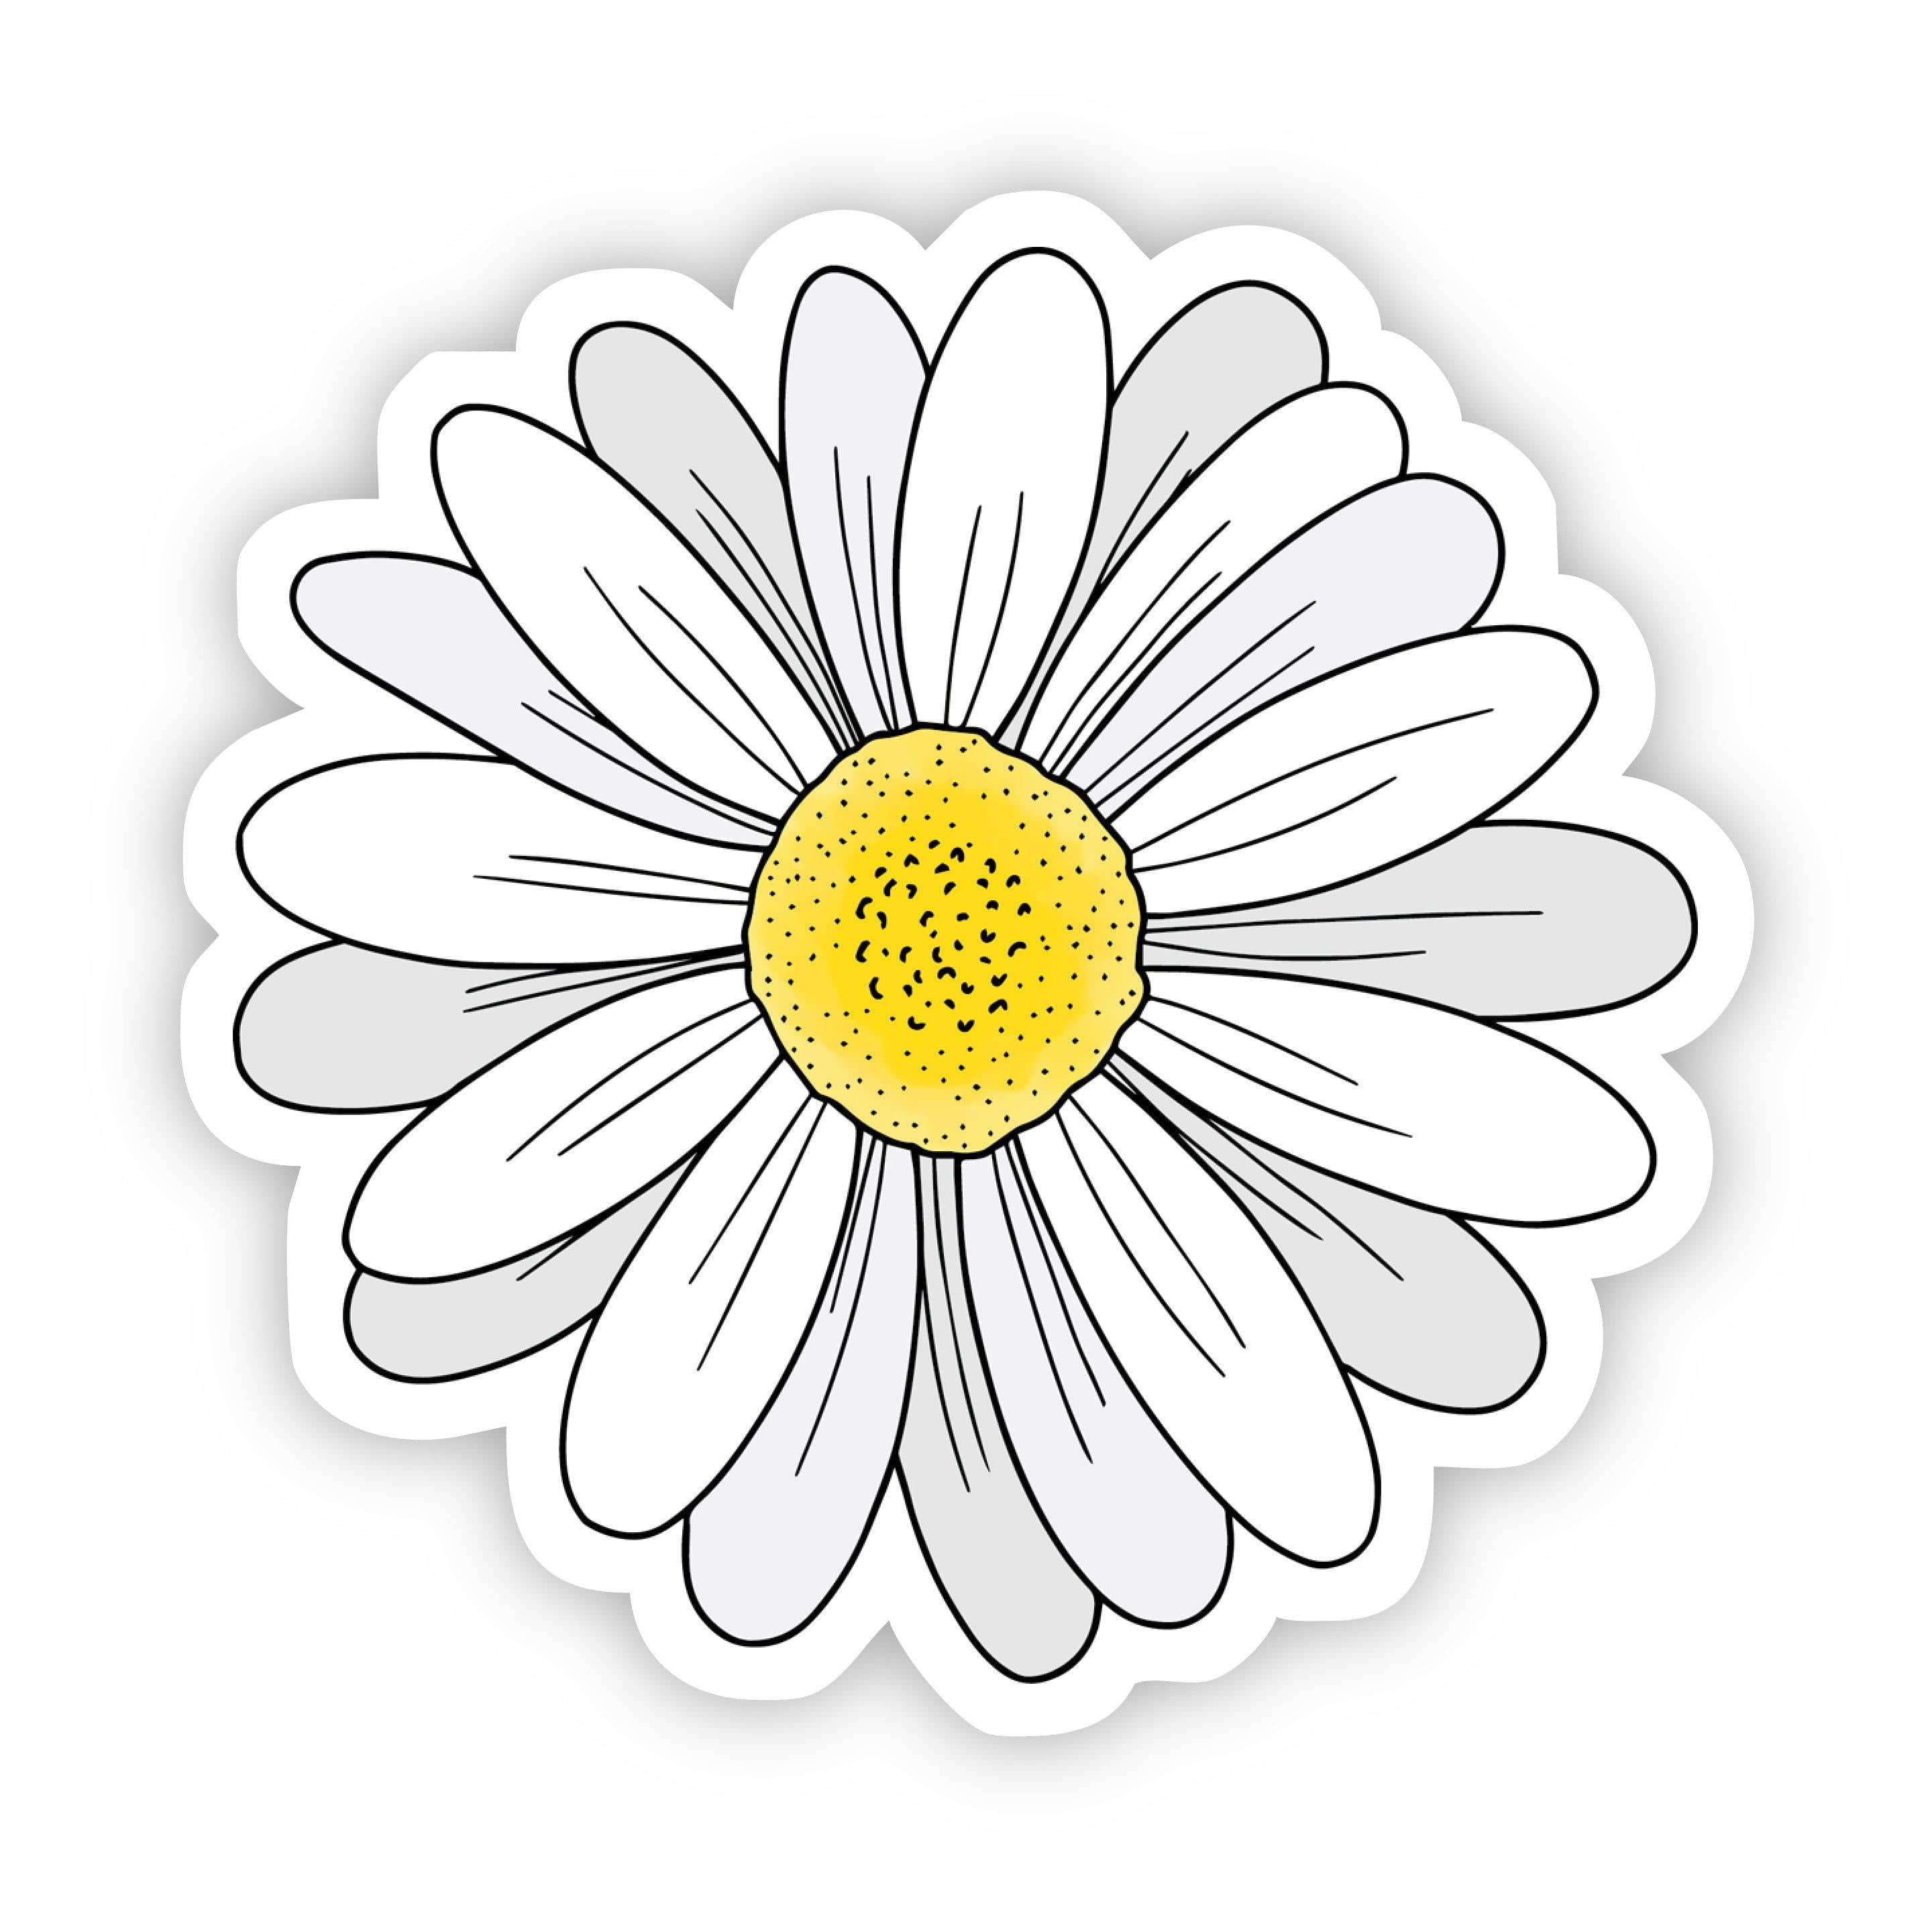 Hand Holding 3 Daisy Flowers, High Quality Vinyl Stickers